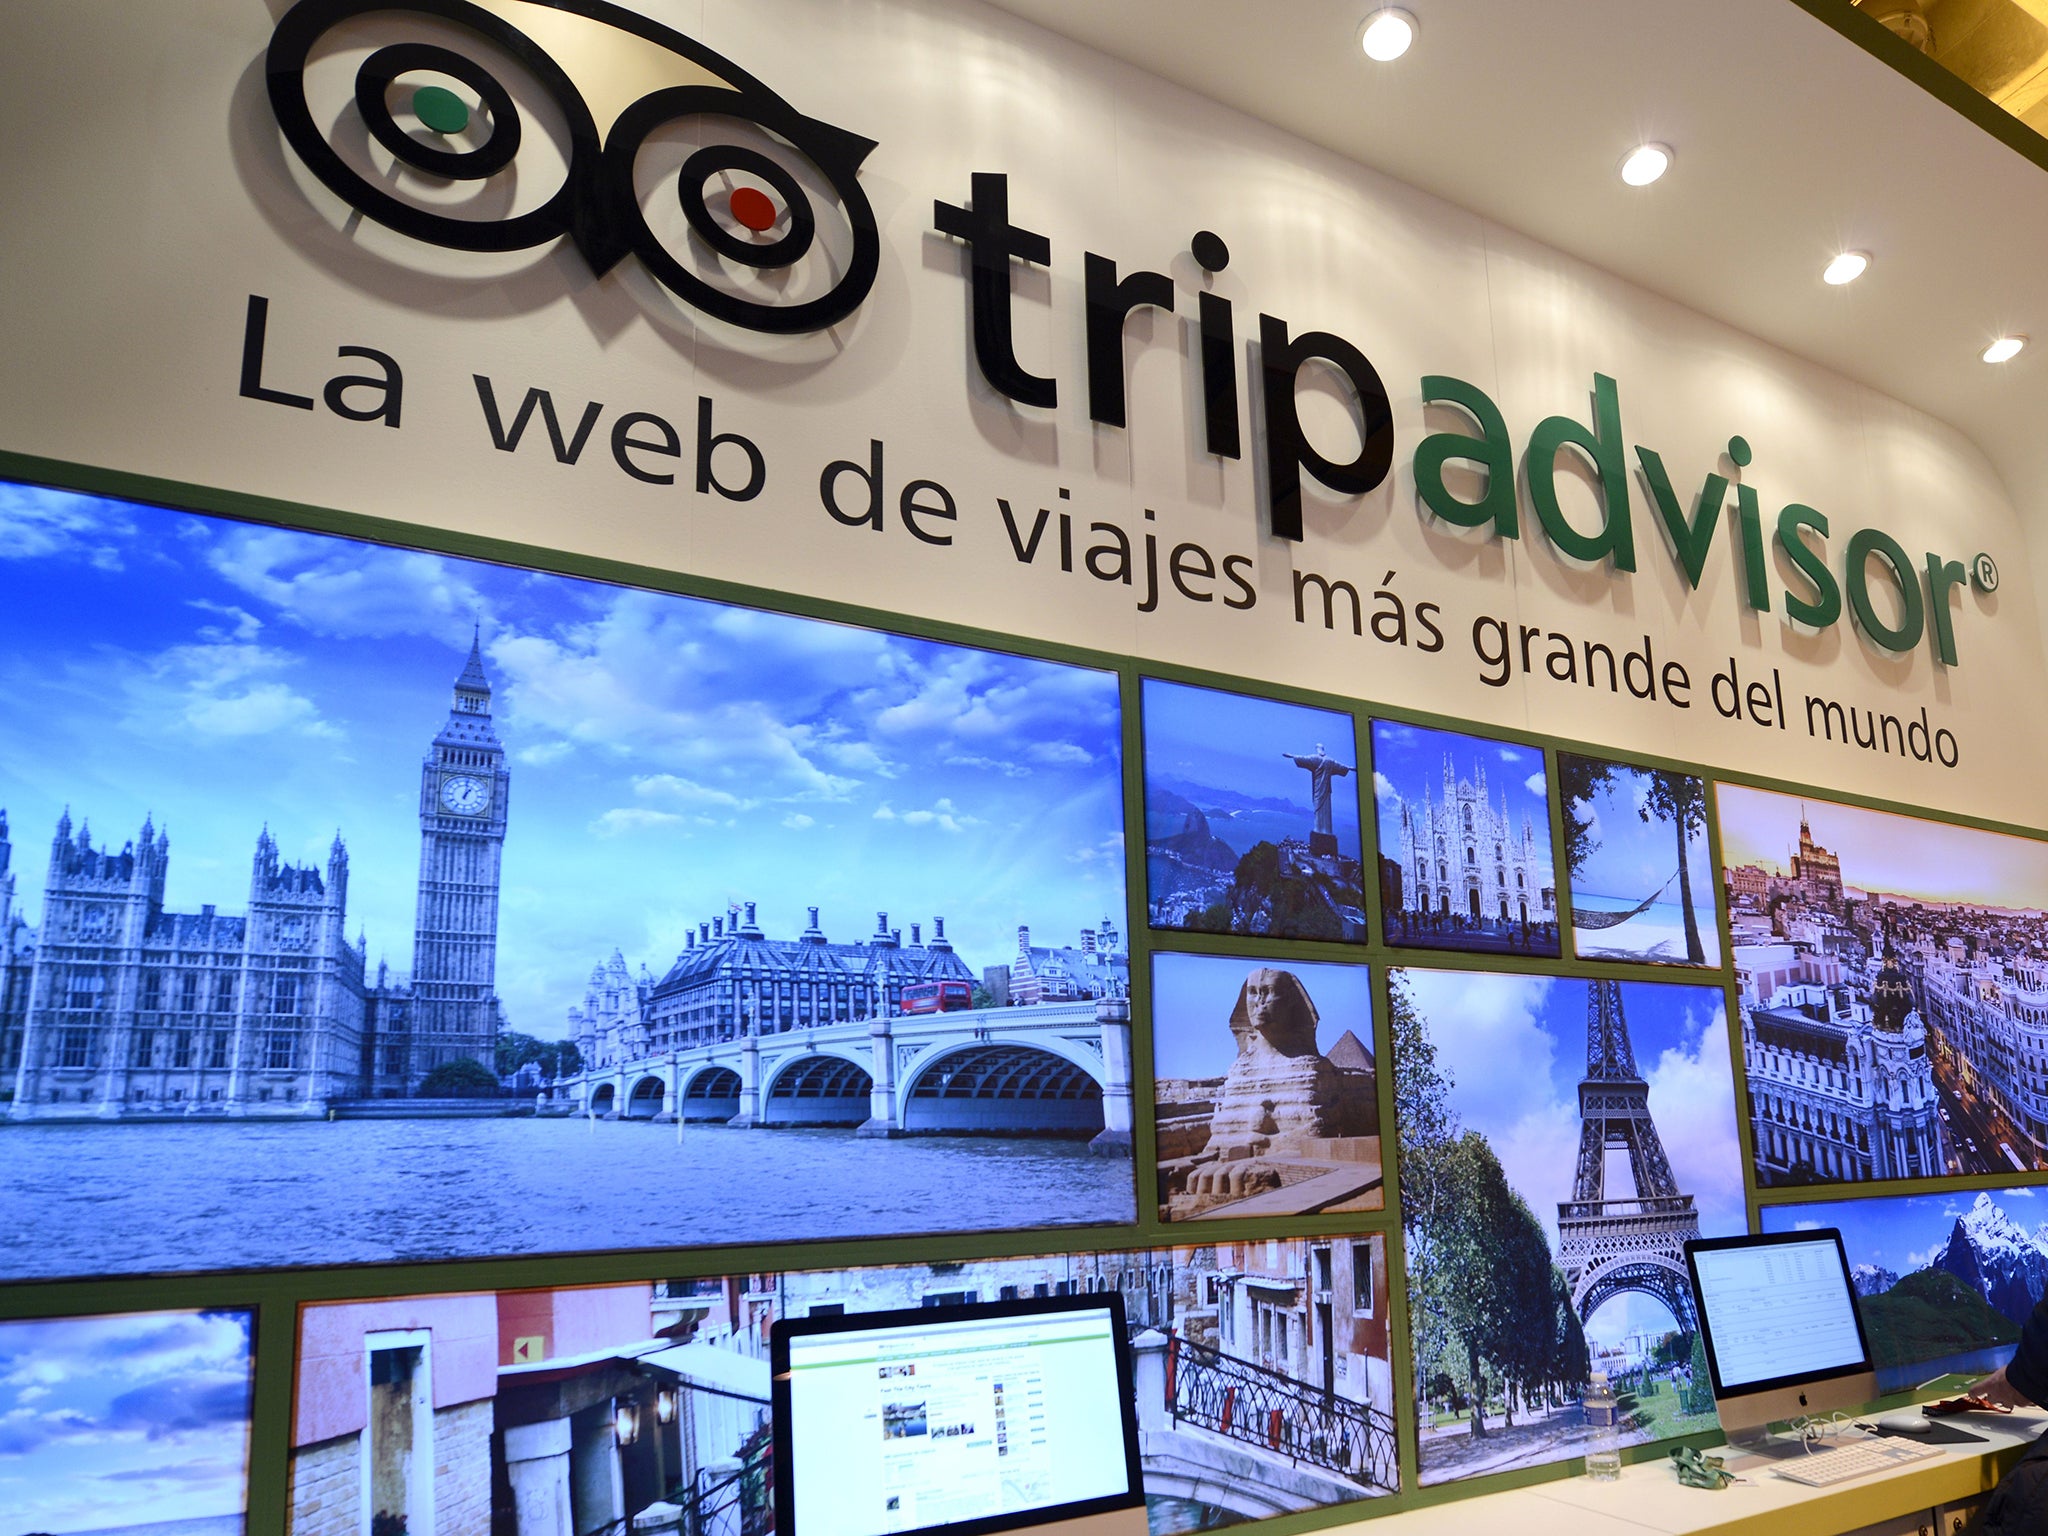 Lawyers are threatening defamation action against members of the public who post negative reviews of their services on TripAdvisor-style websites